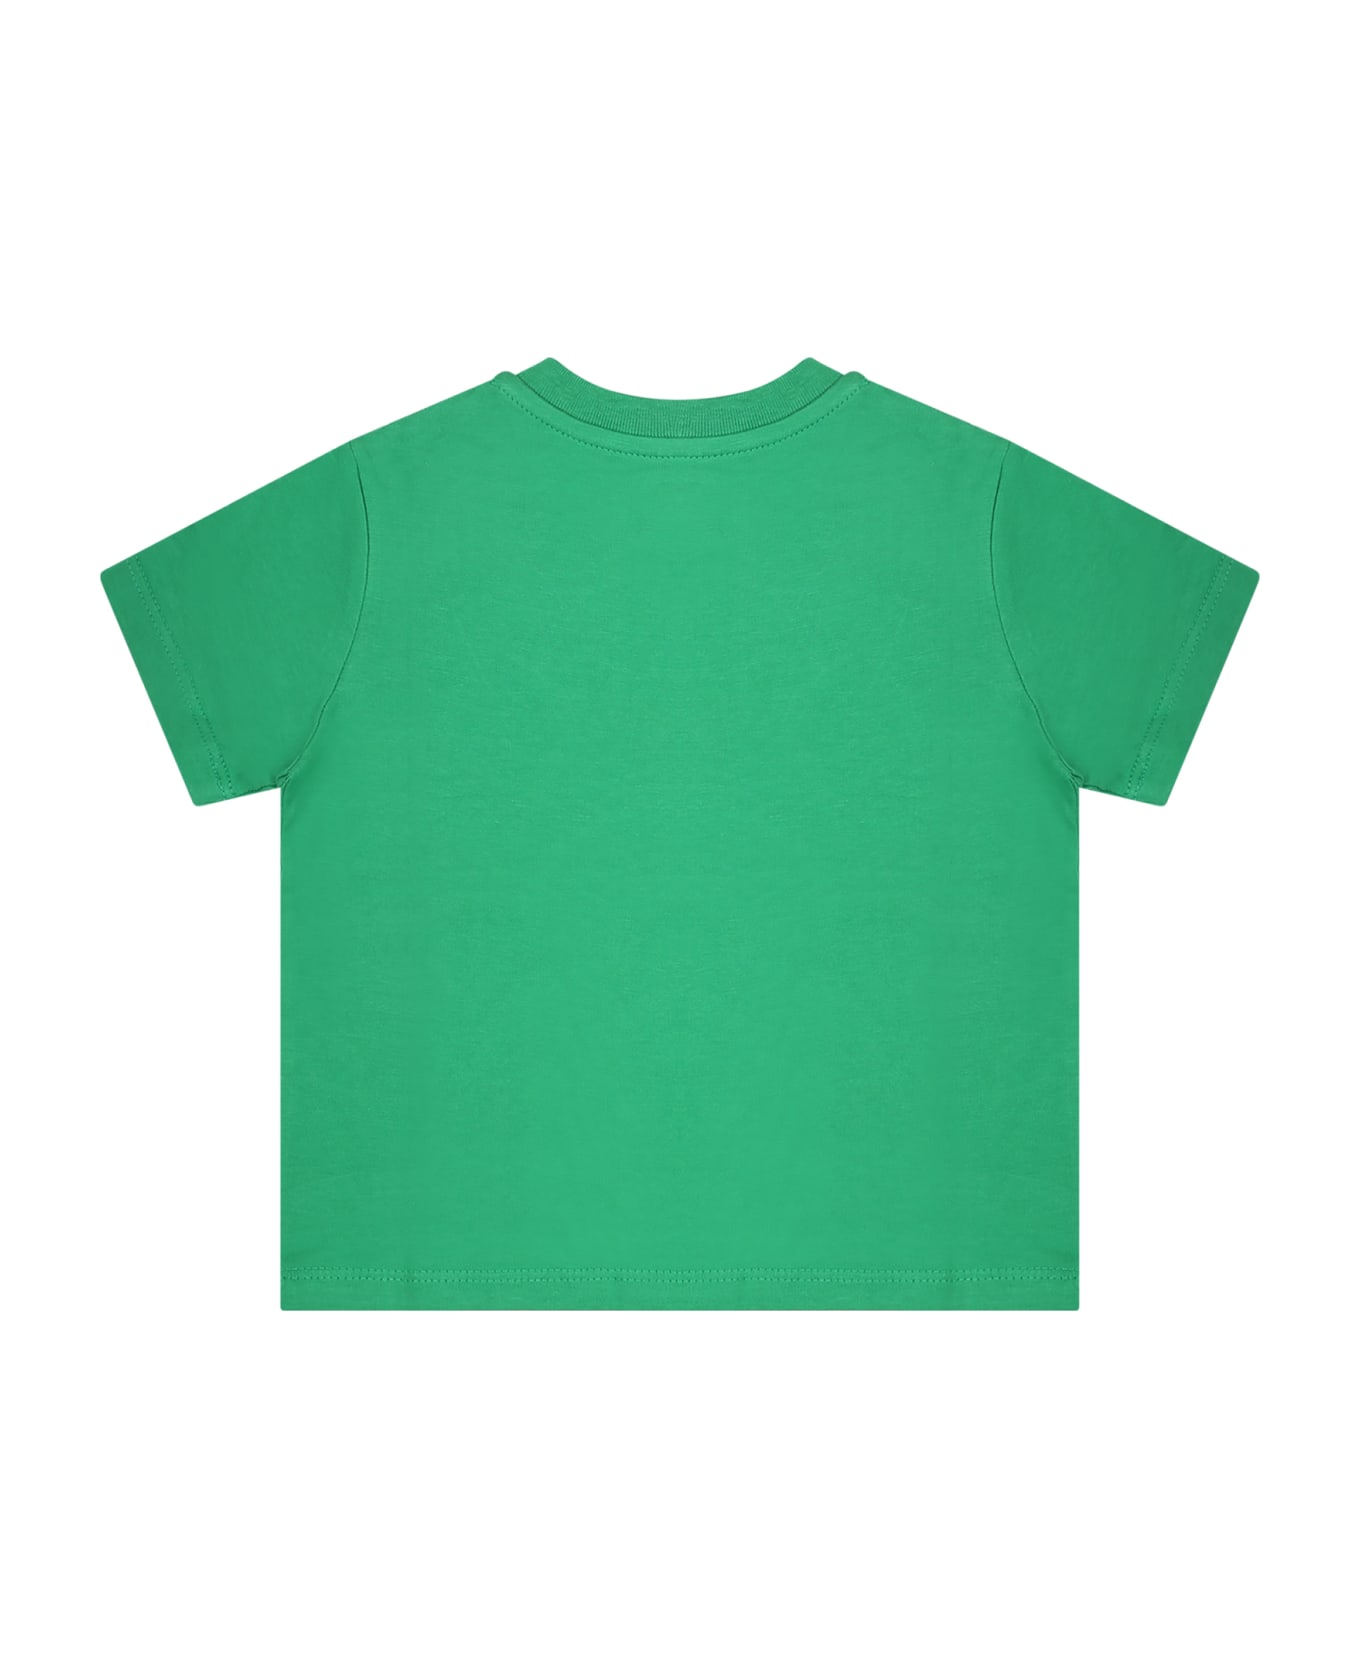 Ralph Lauren Green T-shirt For Baby Boy With Pony - Green